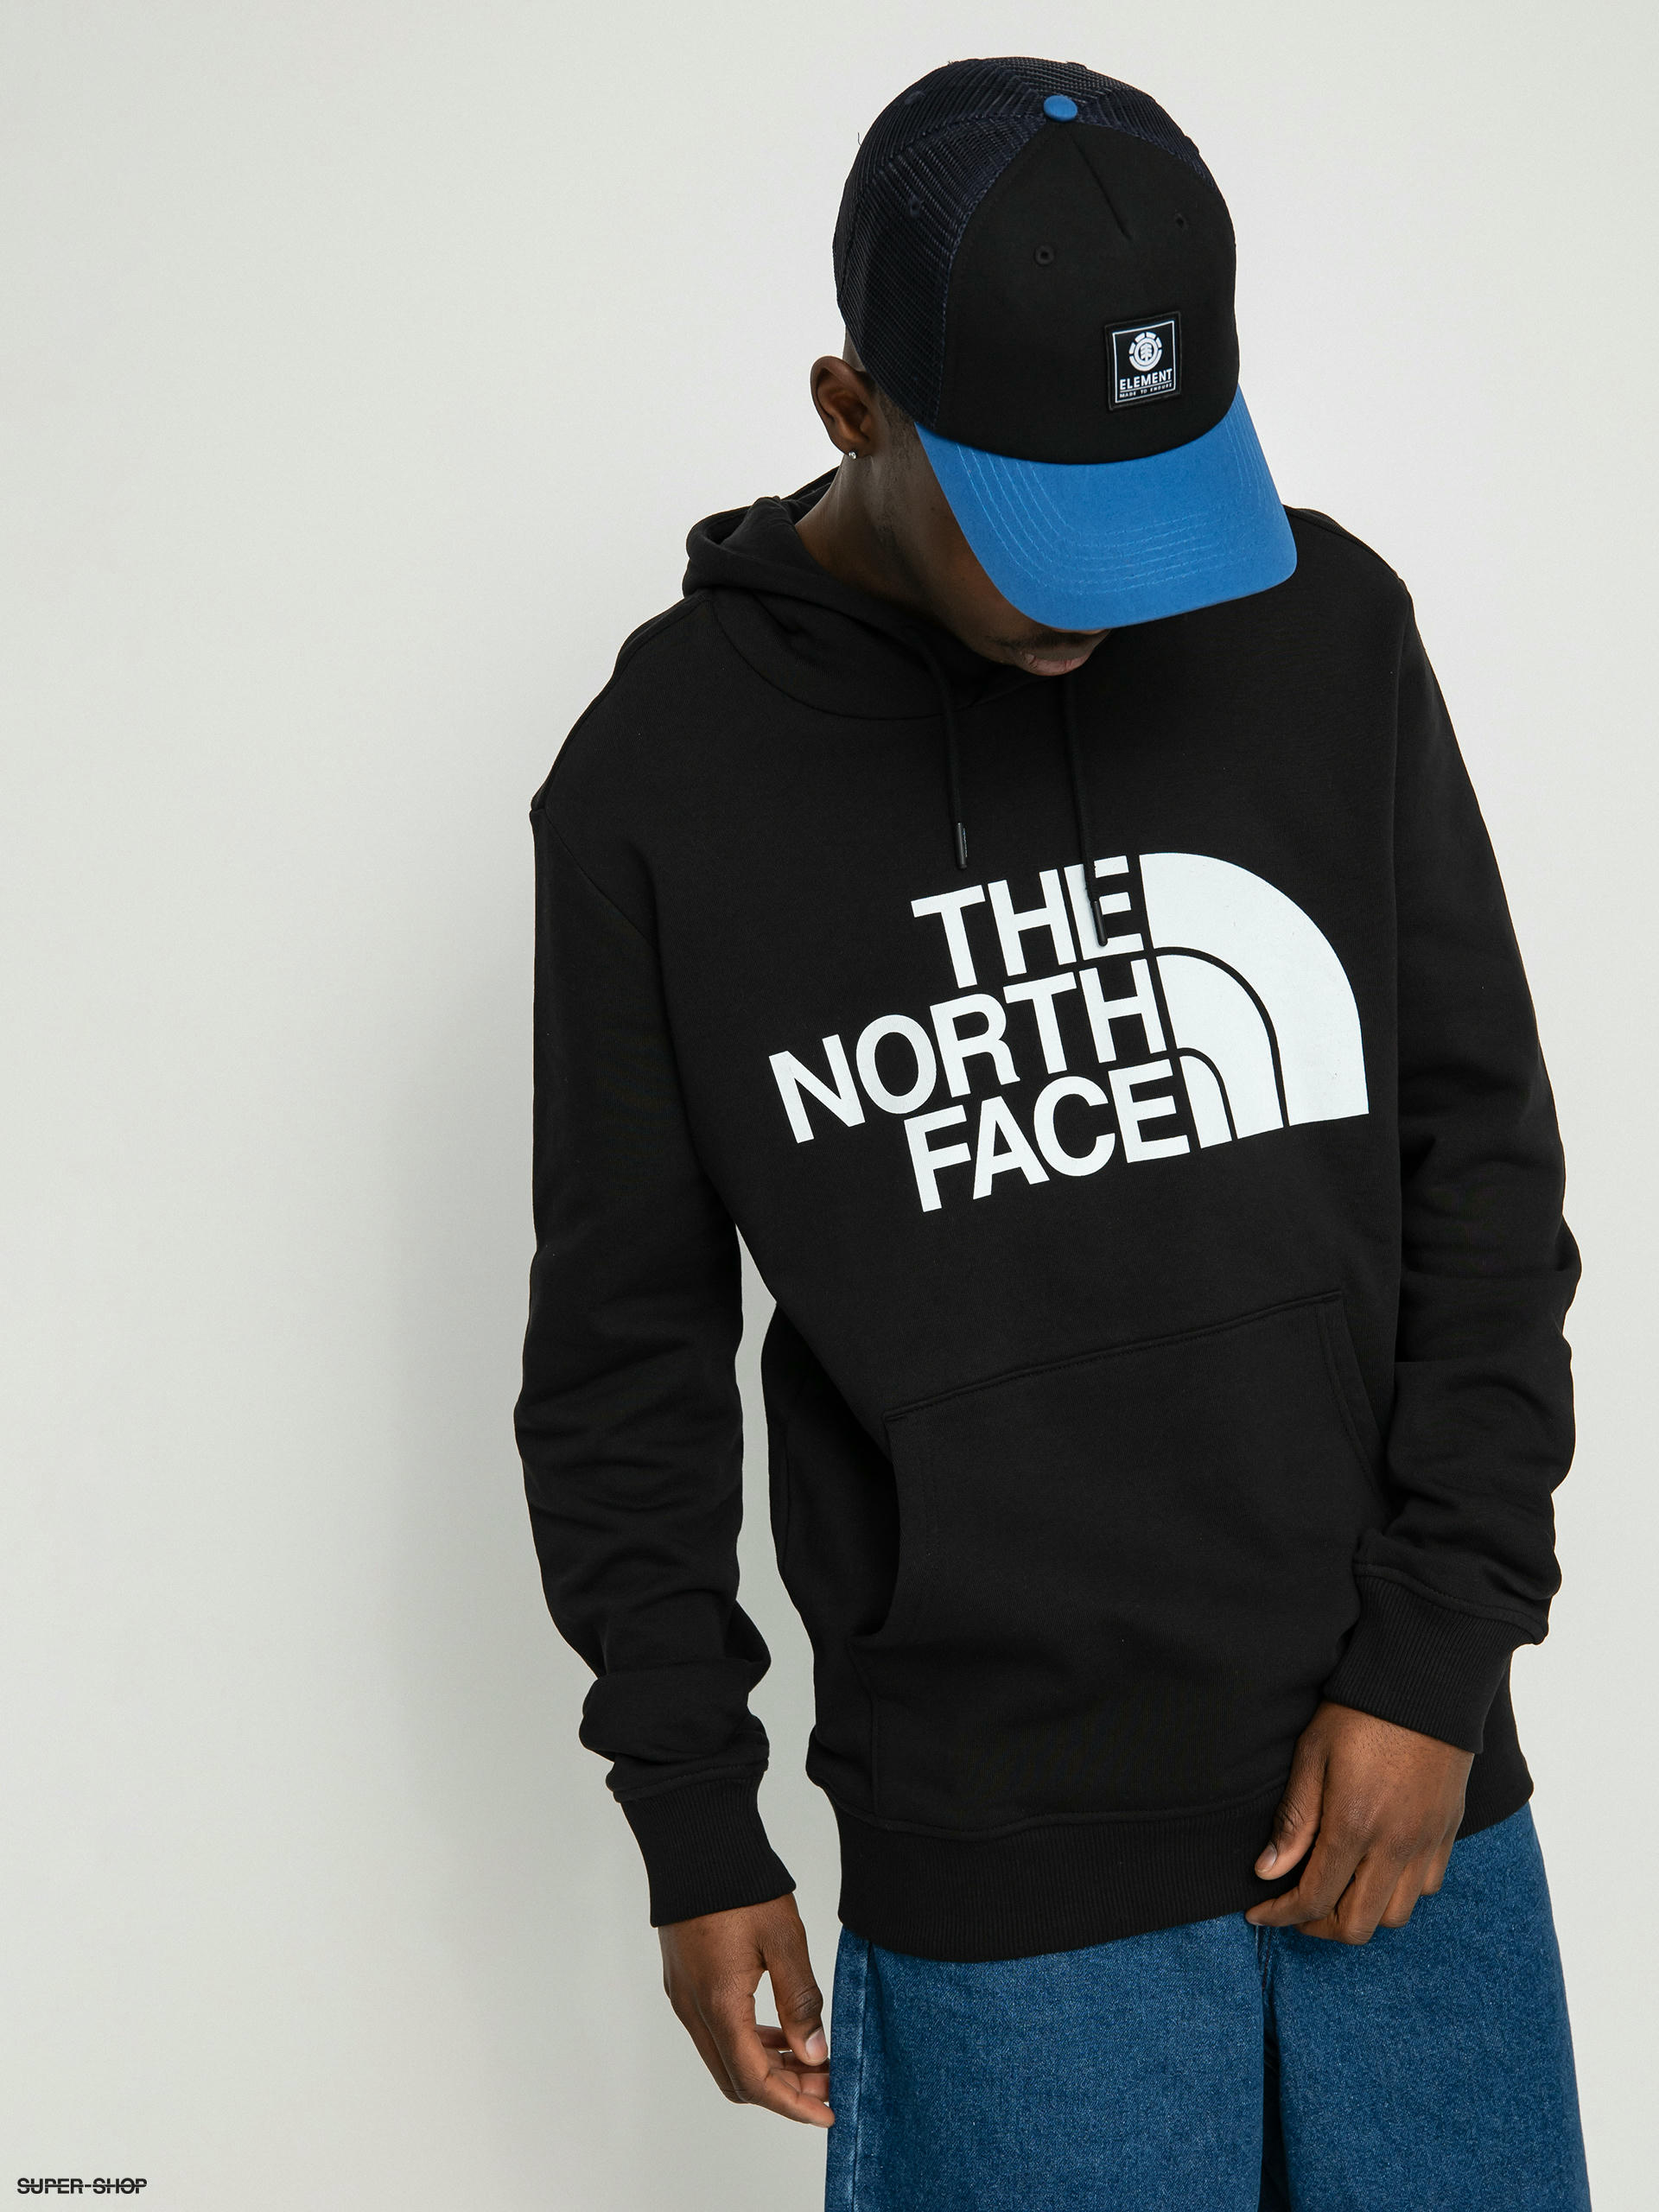 The North Face Standard HD Hoodie (tnf black)